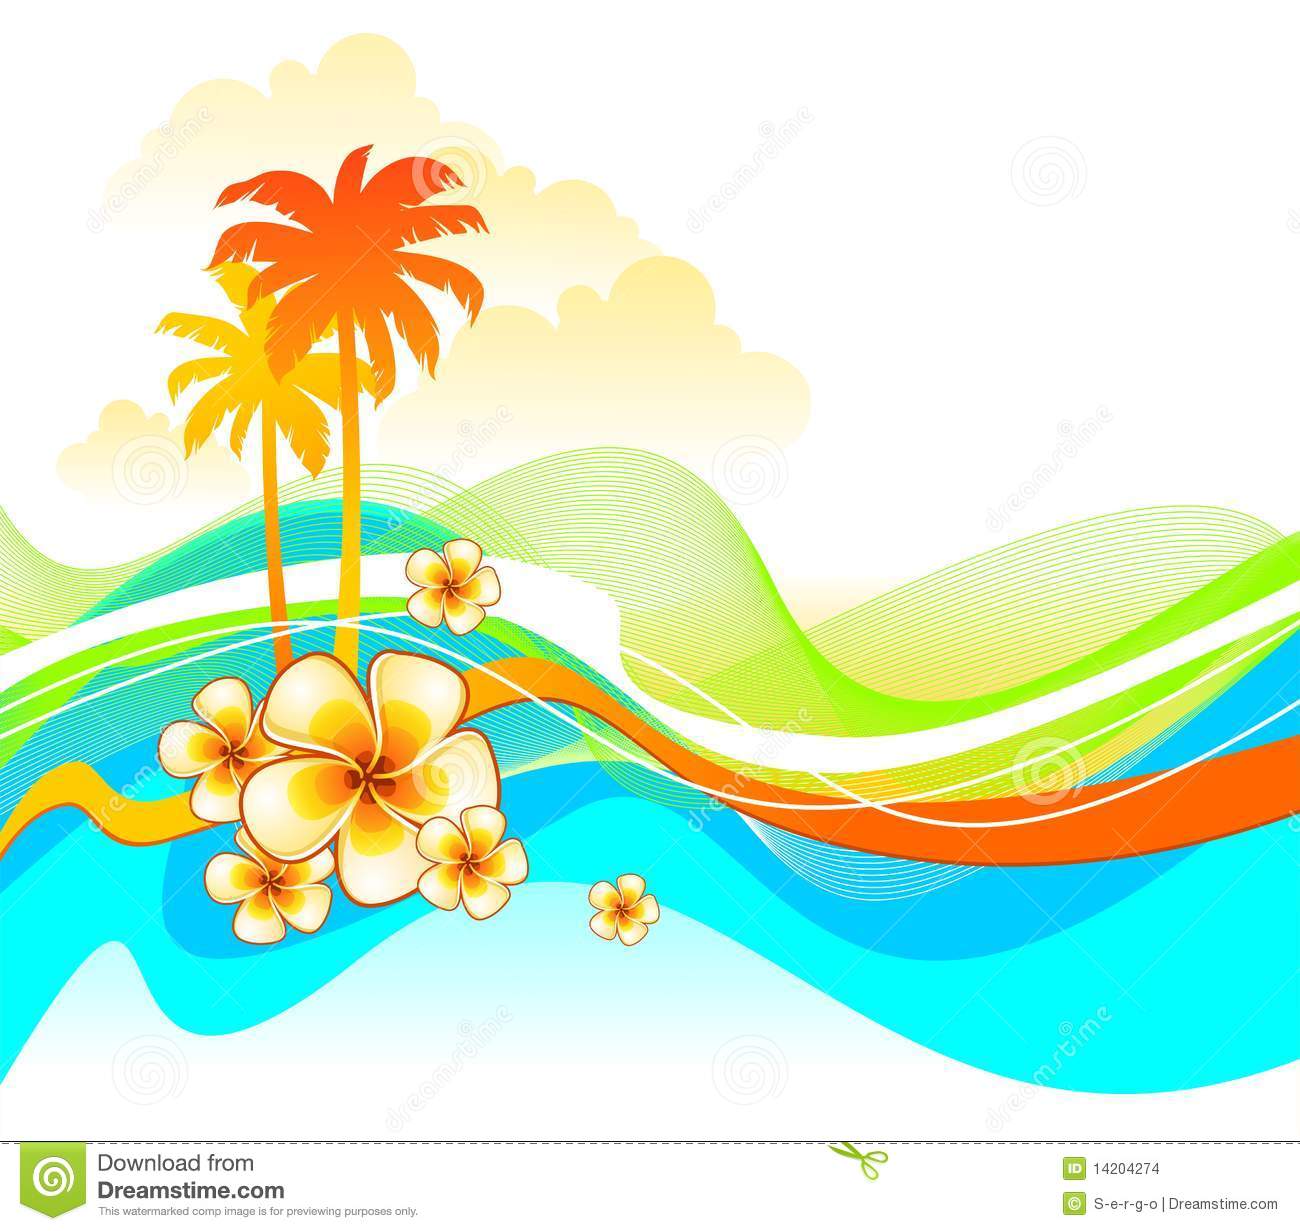 Abstract Illustration With Tropical Flowers Stock Images   Image